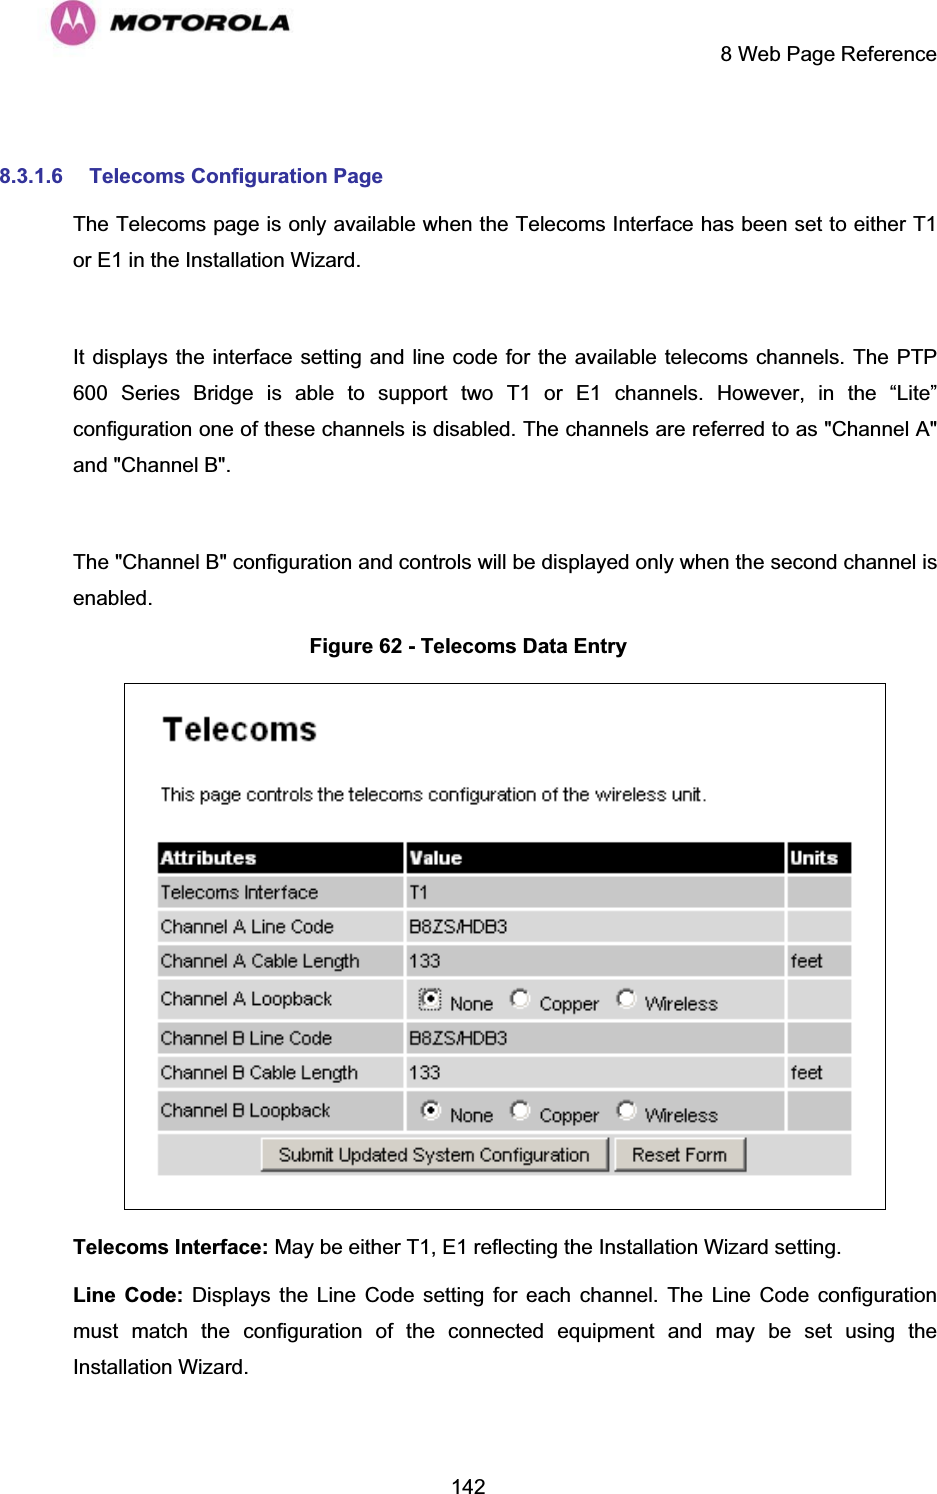     8 Web Page Reference  142 8.3.1.6  Telecoms Configuration Page The Telecoms page is only available when the Telecoms Interface has been set to either T1 or E1 in the Installation Wizard.   It displays the interface setting and line code for the available telecoms channels. The PTP 600 Series Bridge is able to support two T1 or E1 channels. However, in the “Lite” configuration one of these channels is disabled. The channels are referred to as &quot;Channel A&quot; and &quot;Channel B&quot;.  The &quot;Channel B&quot; configuration and controls will be displayed only when the second channel is enabled.  Figure 62 - Telecoms Data Entry  Telecoms Interface: May be either T1, E1 reflecting the Installation Wizard setting. Line Code: Displays the Line Code setting for each channel. The Line Code configuration must match the configuration of the connected equipment and may be set using the Installation Wizard.  